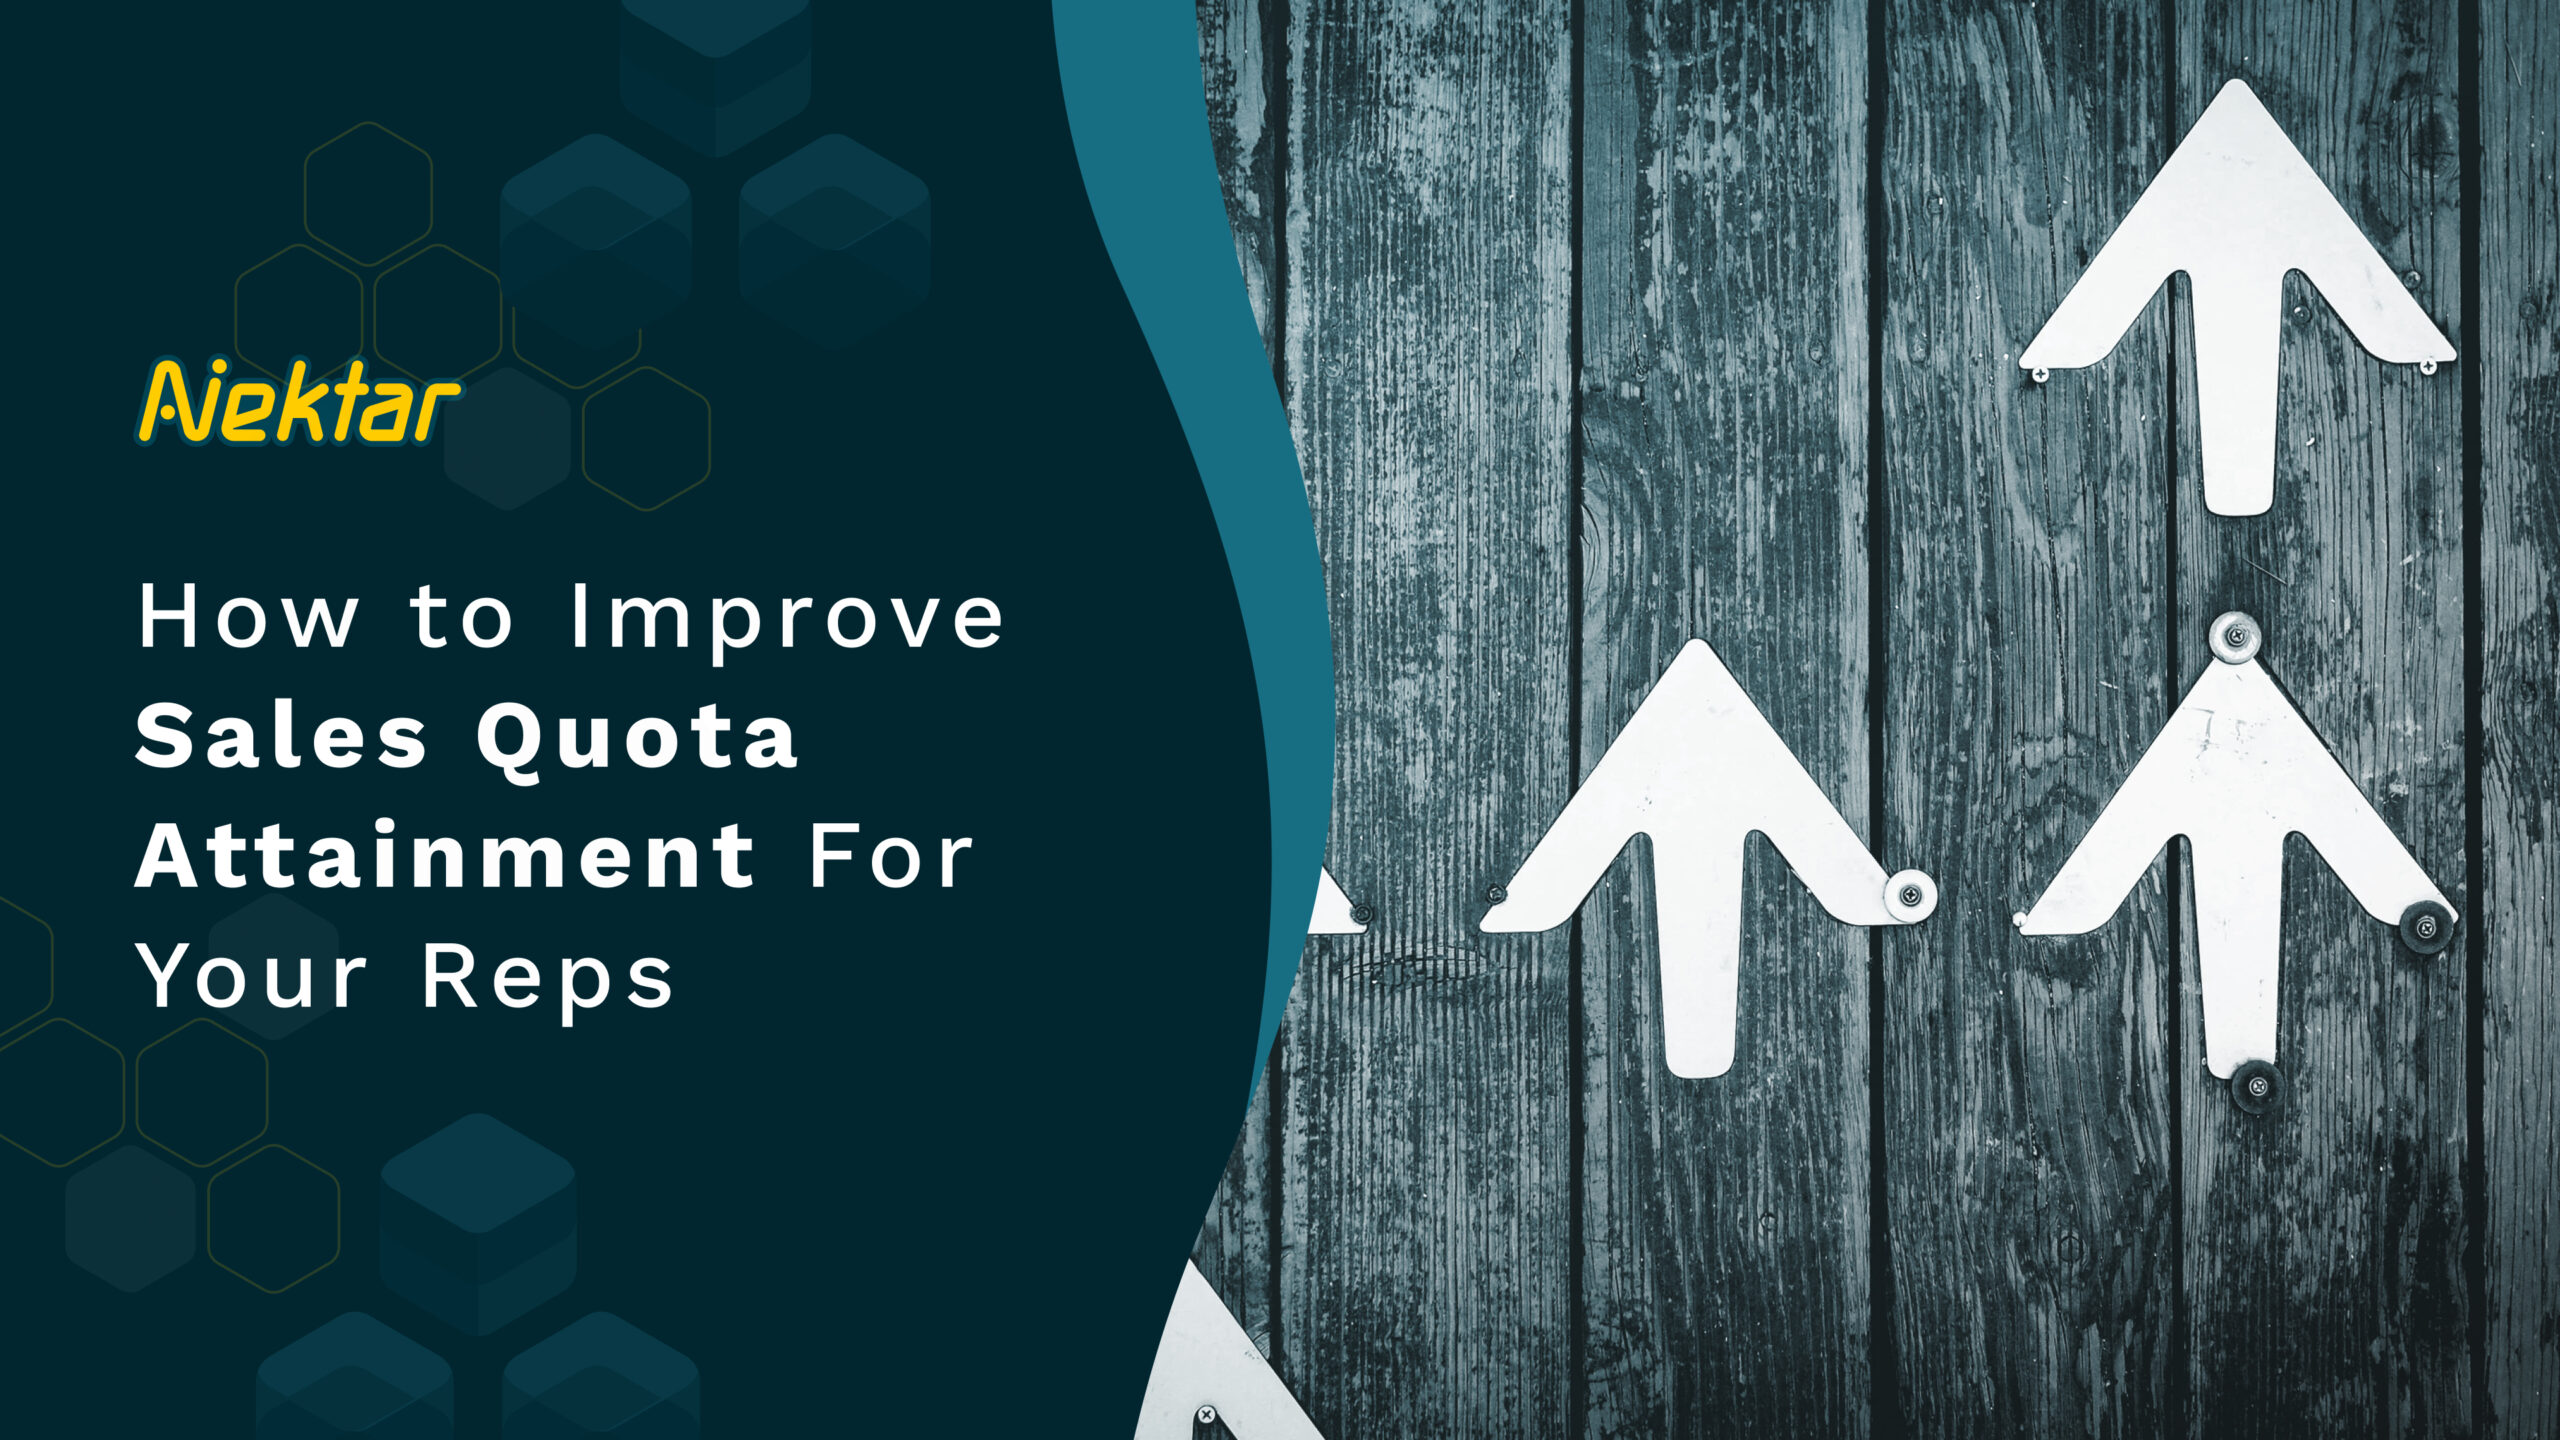 How to Improve Sales Quota Attainment For Your Reps